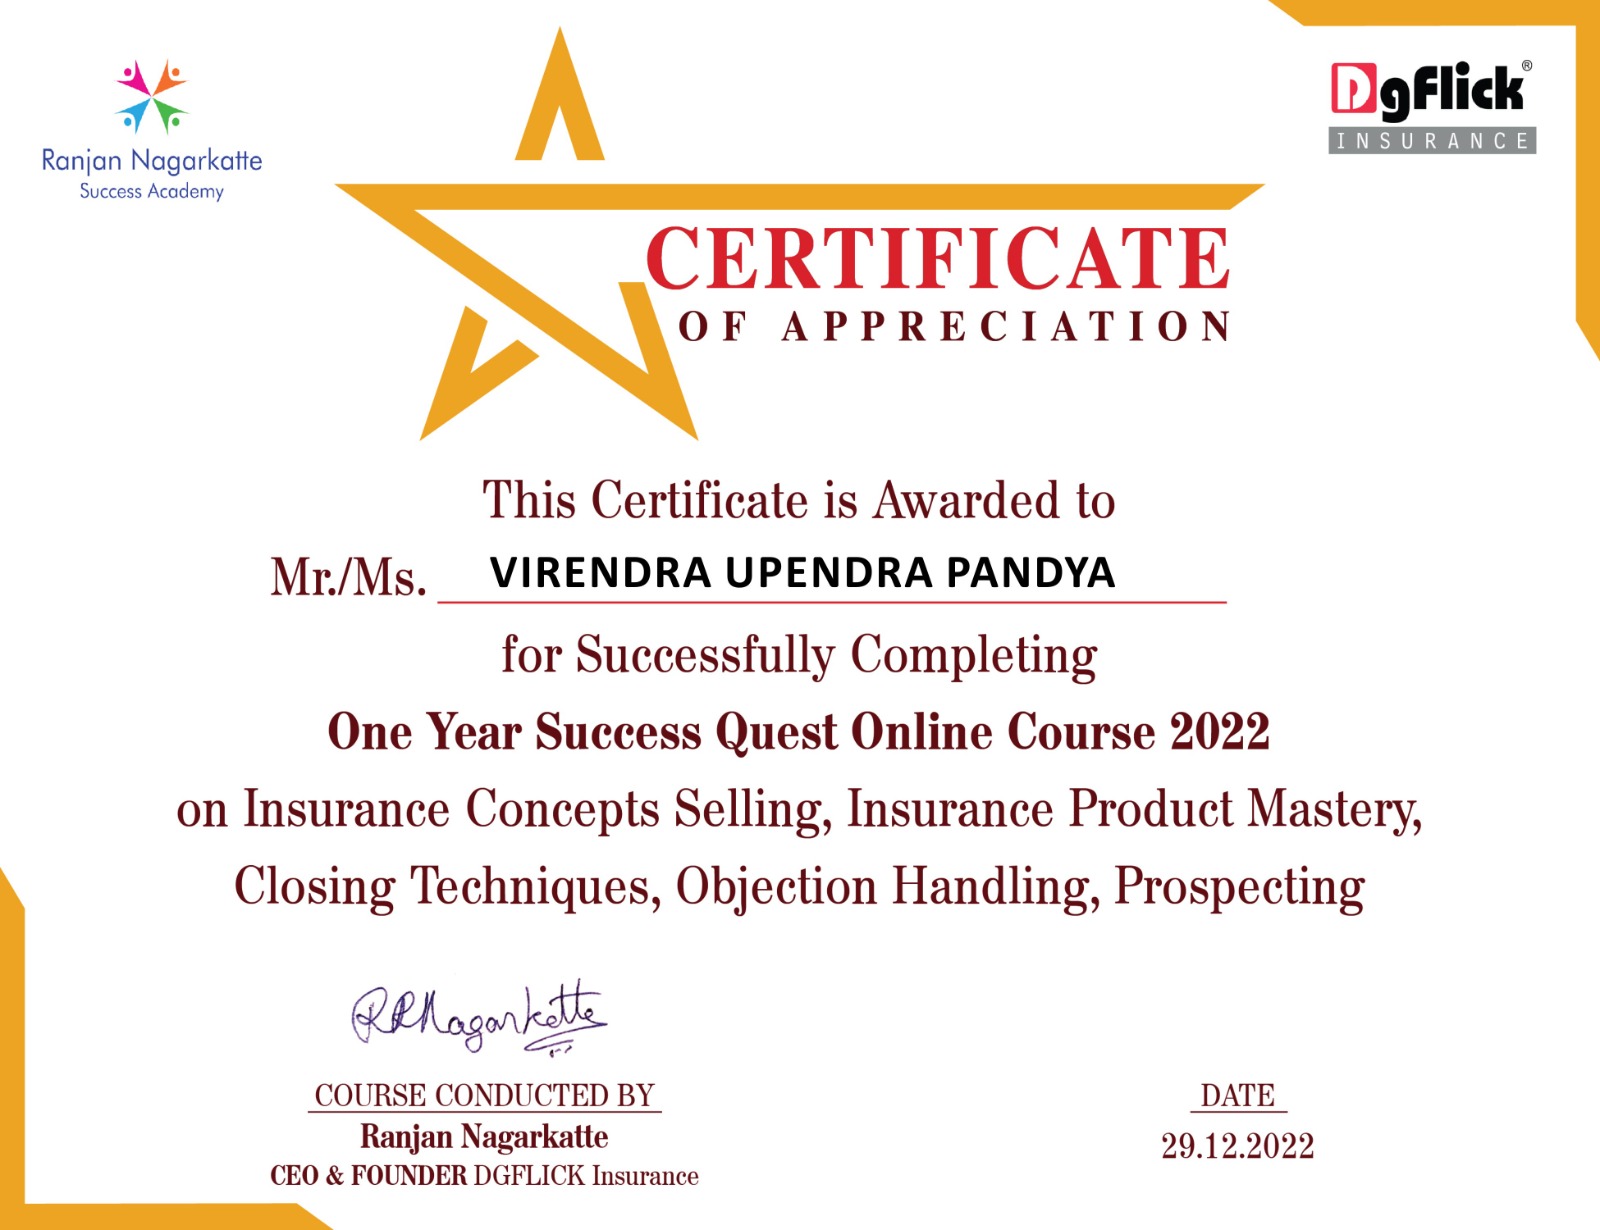 Attended One Year Success Quest Online Course 2022